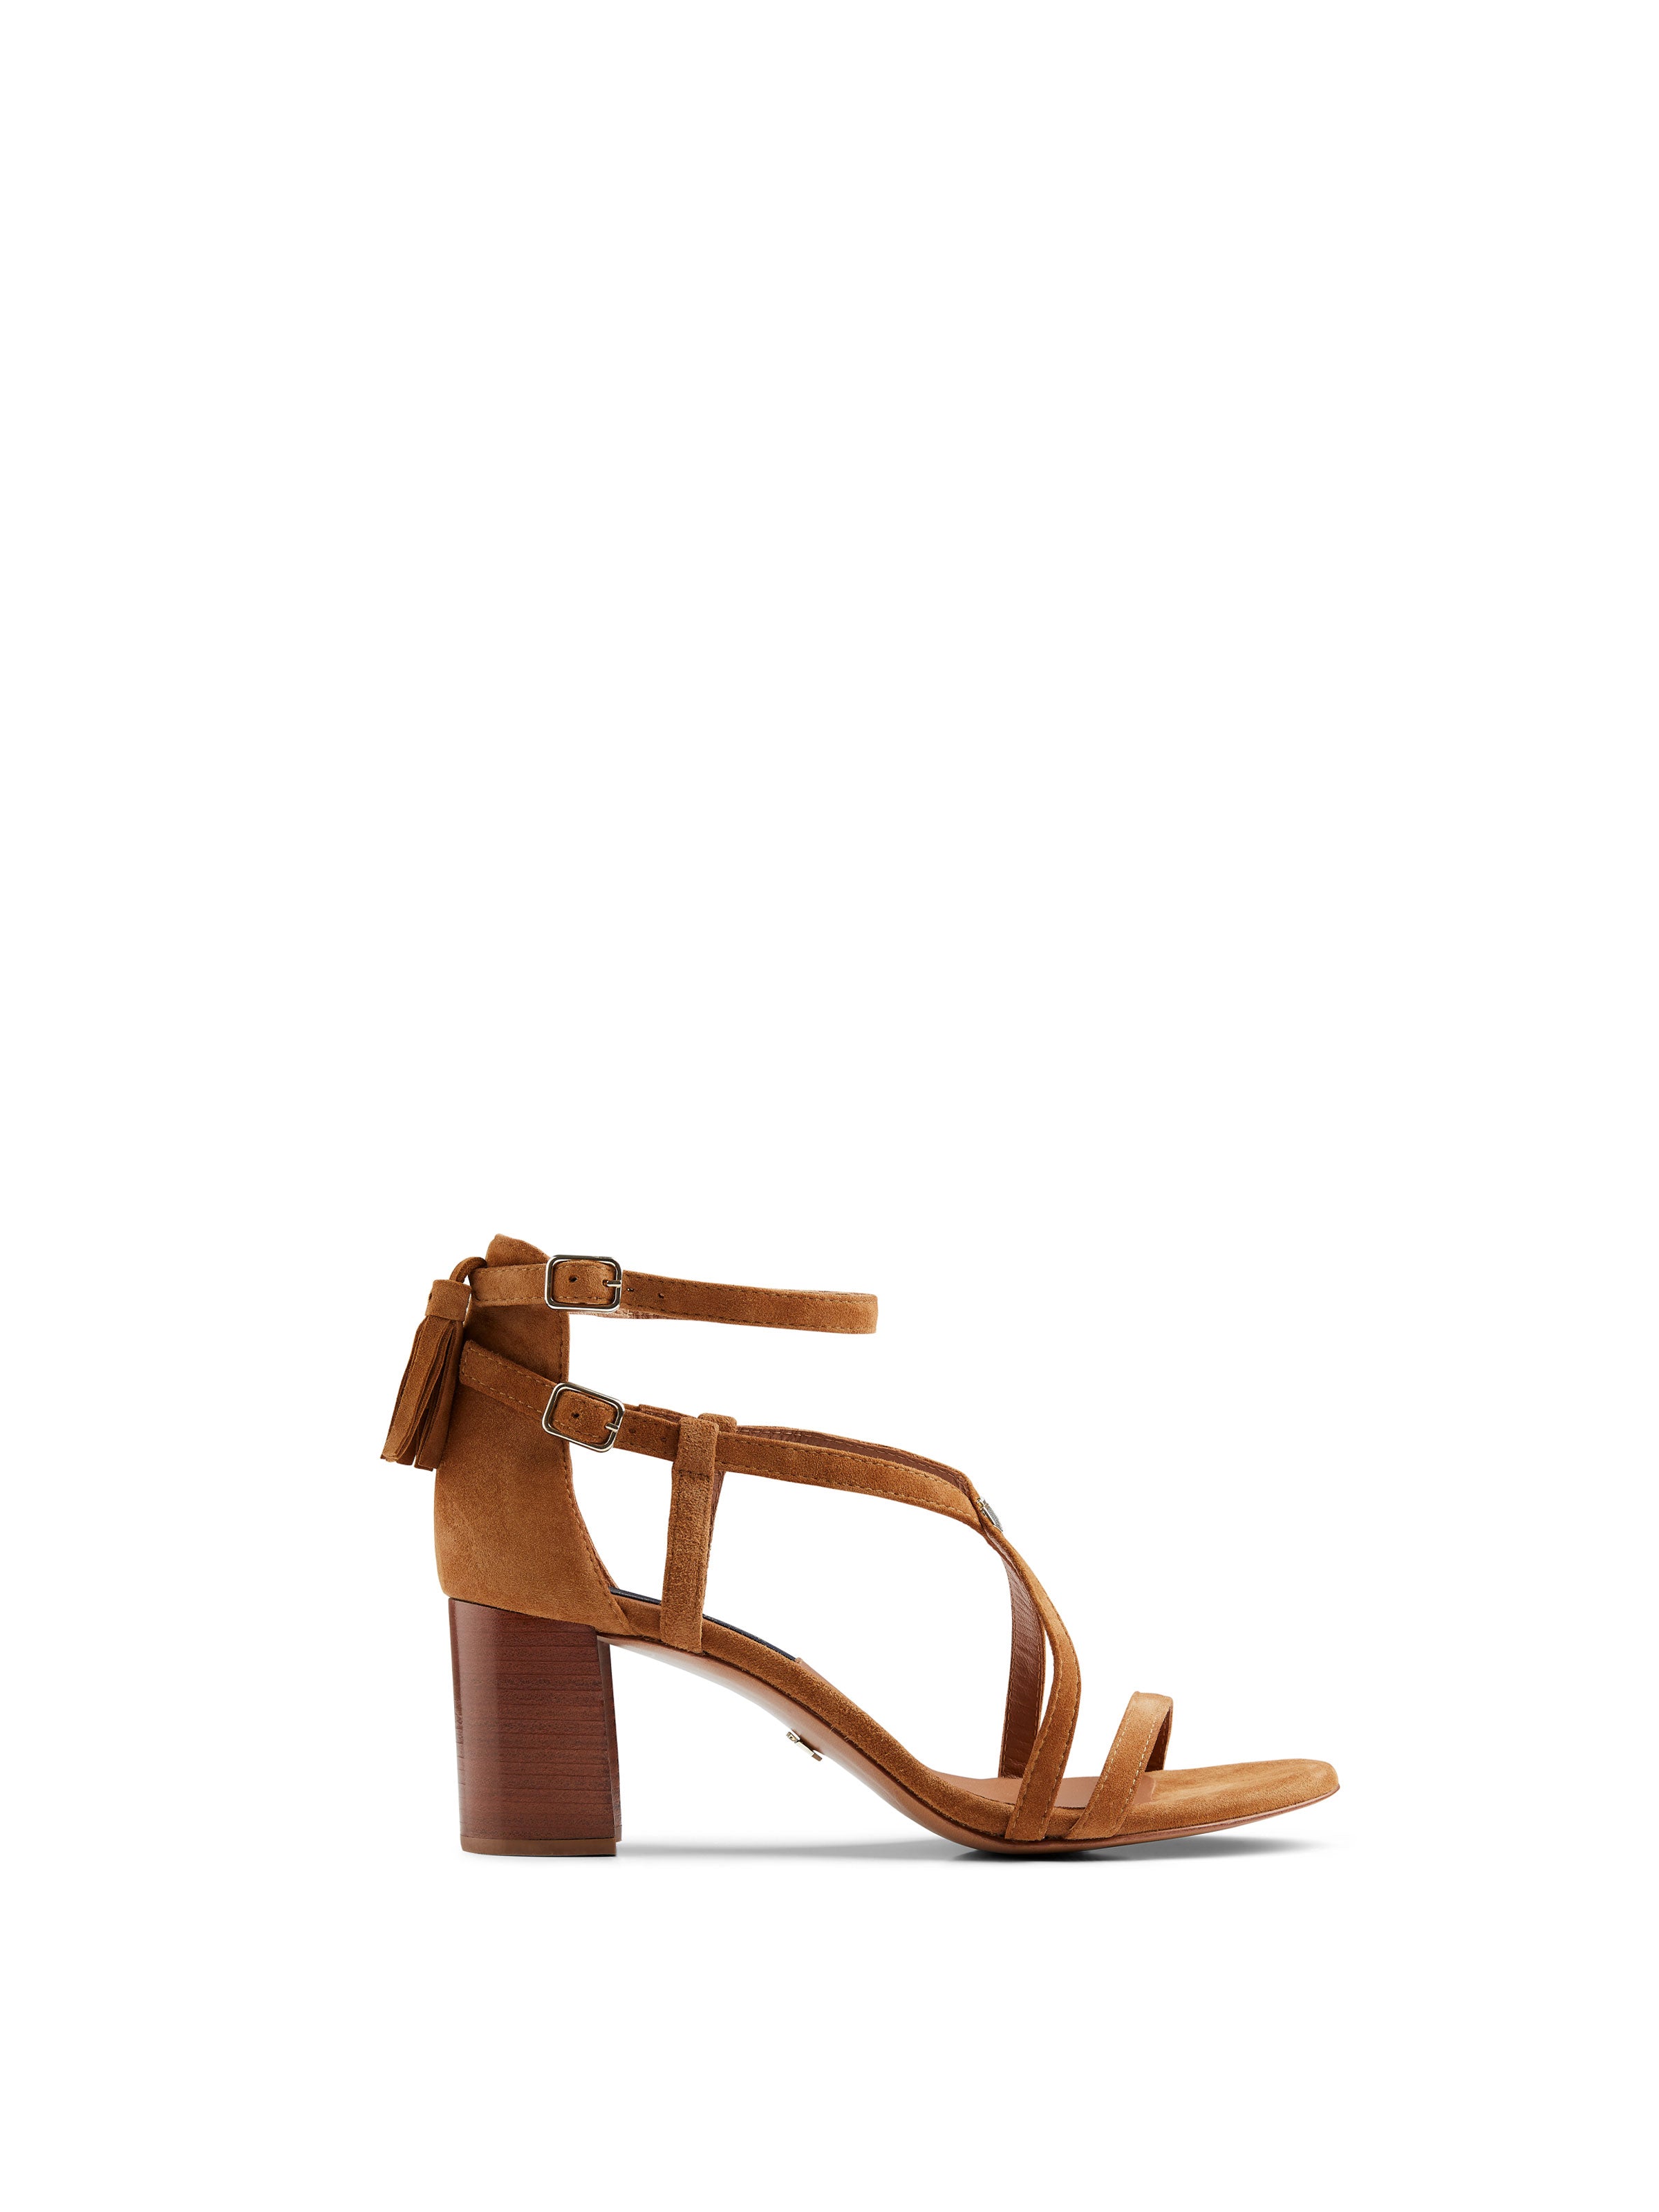 The Heeled Brancaster - Women's Sandal in Tan Suede | Fairfax & Favor